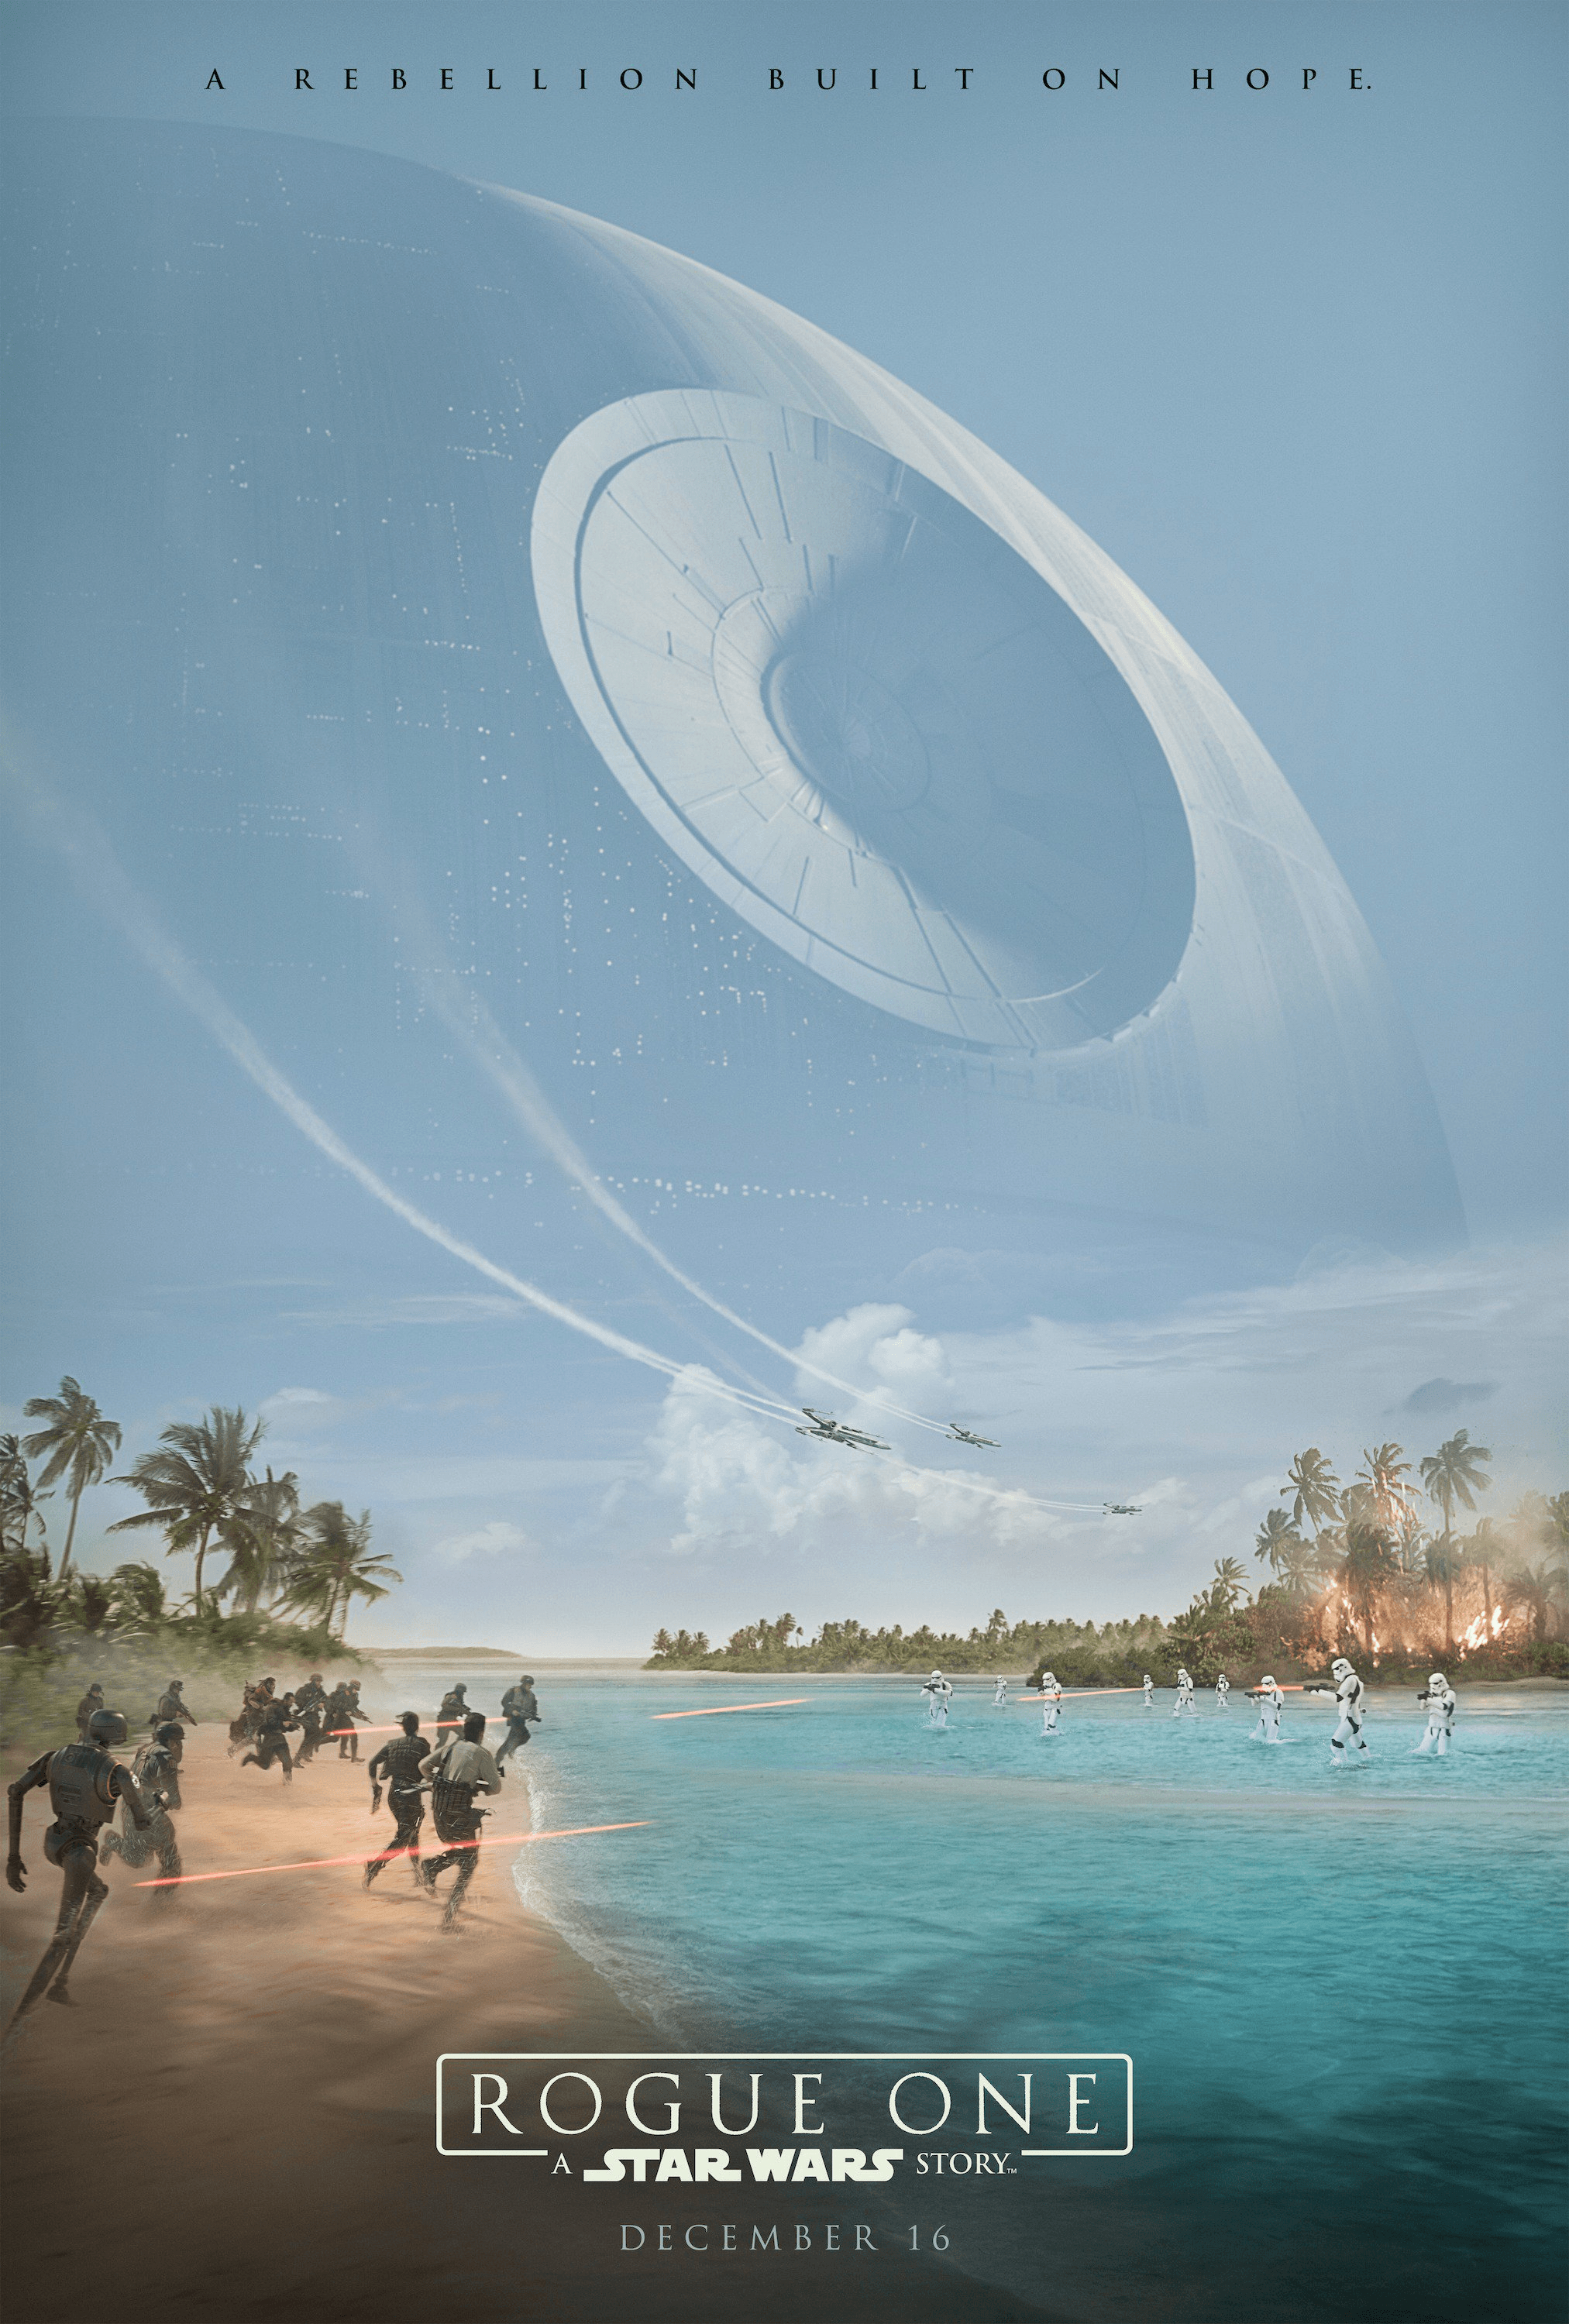 Rogue One A Star Wars Story Poster 2016 wallpapers HD 2016 in Star